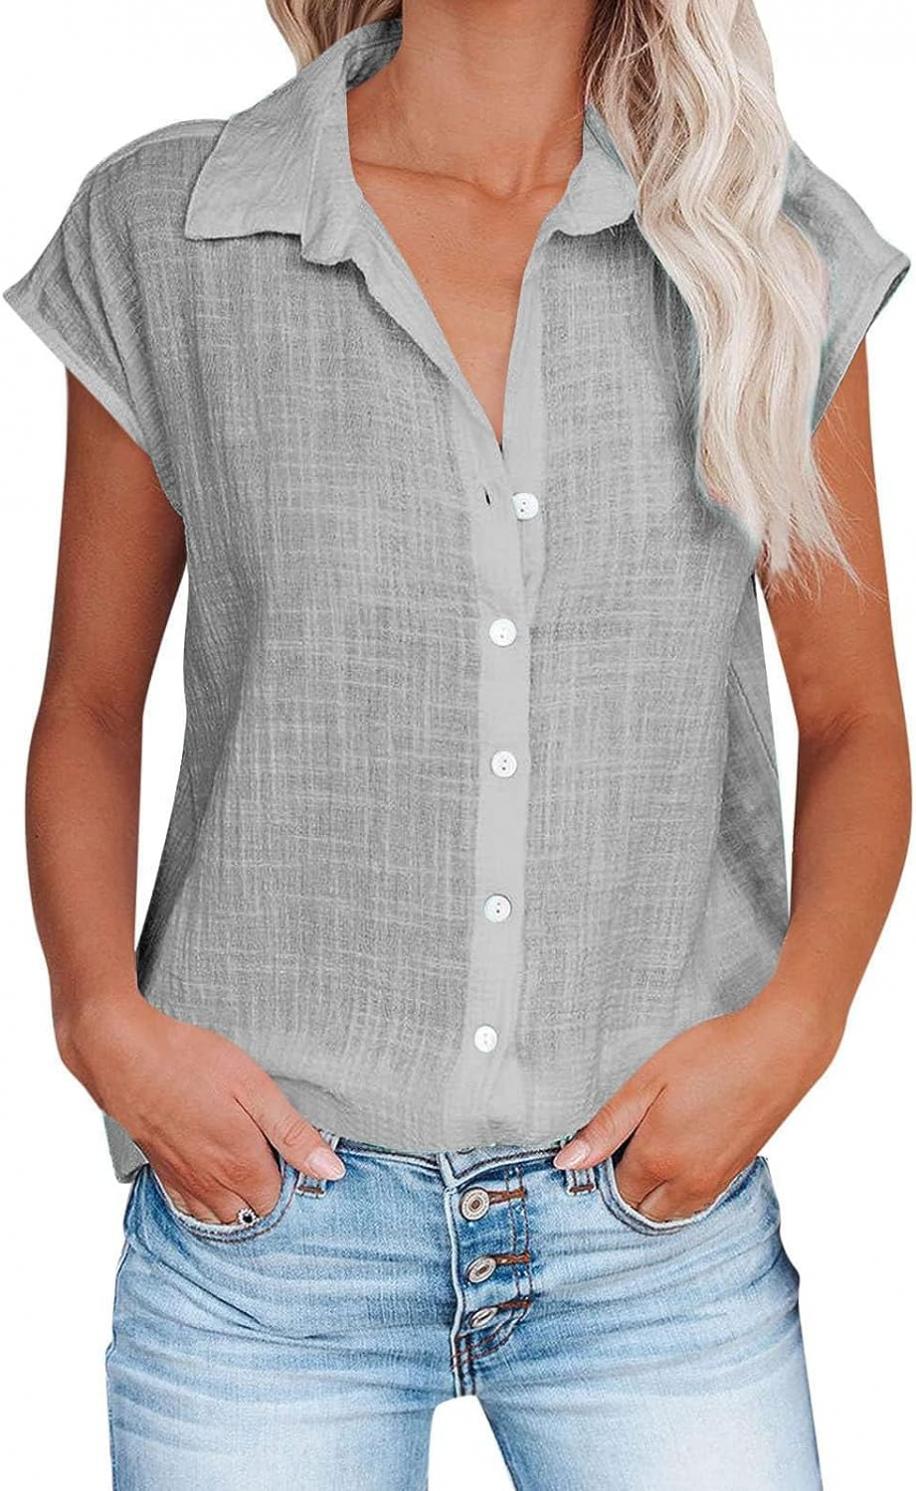 Ceboyel Shirts for Women Trendy Summer Cotton Linen Short Sleeve Tops Collared Button Down Causal Blouse Laides Clothing 2023